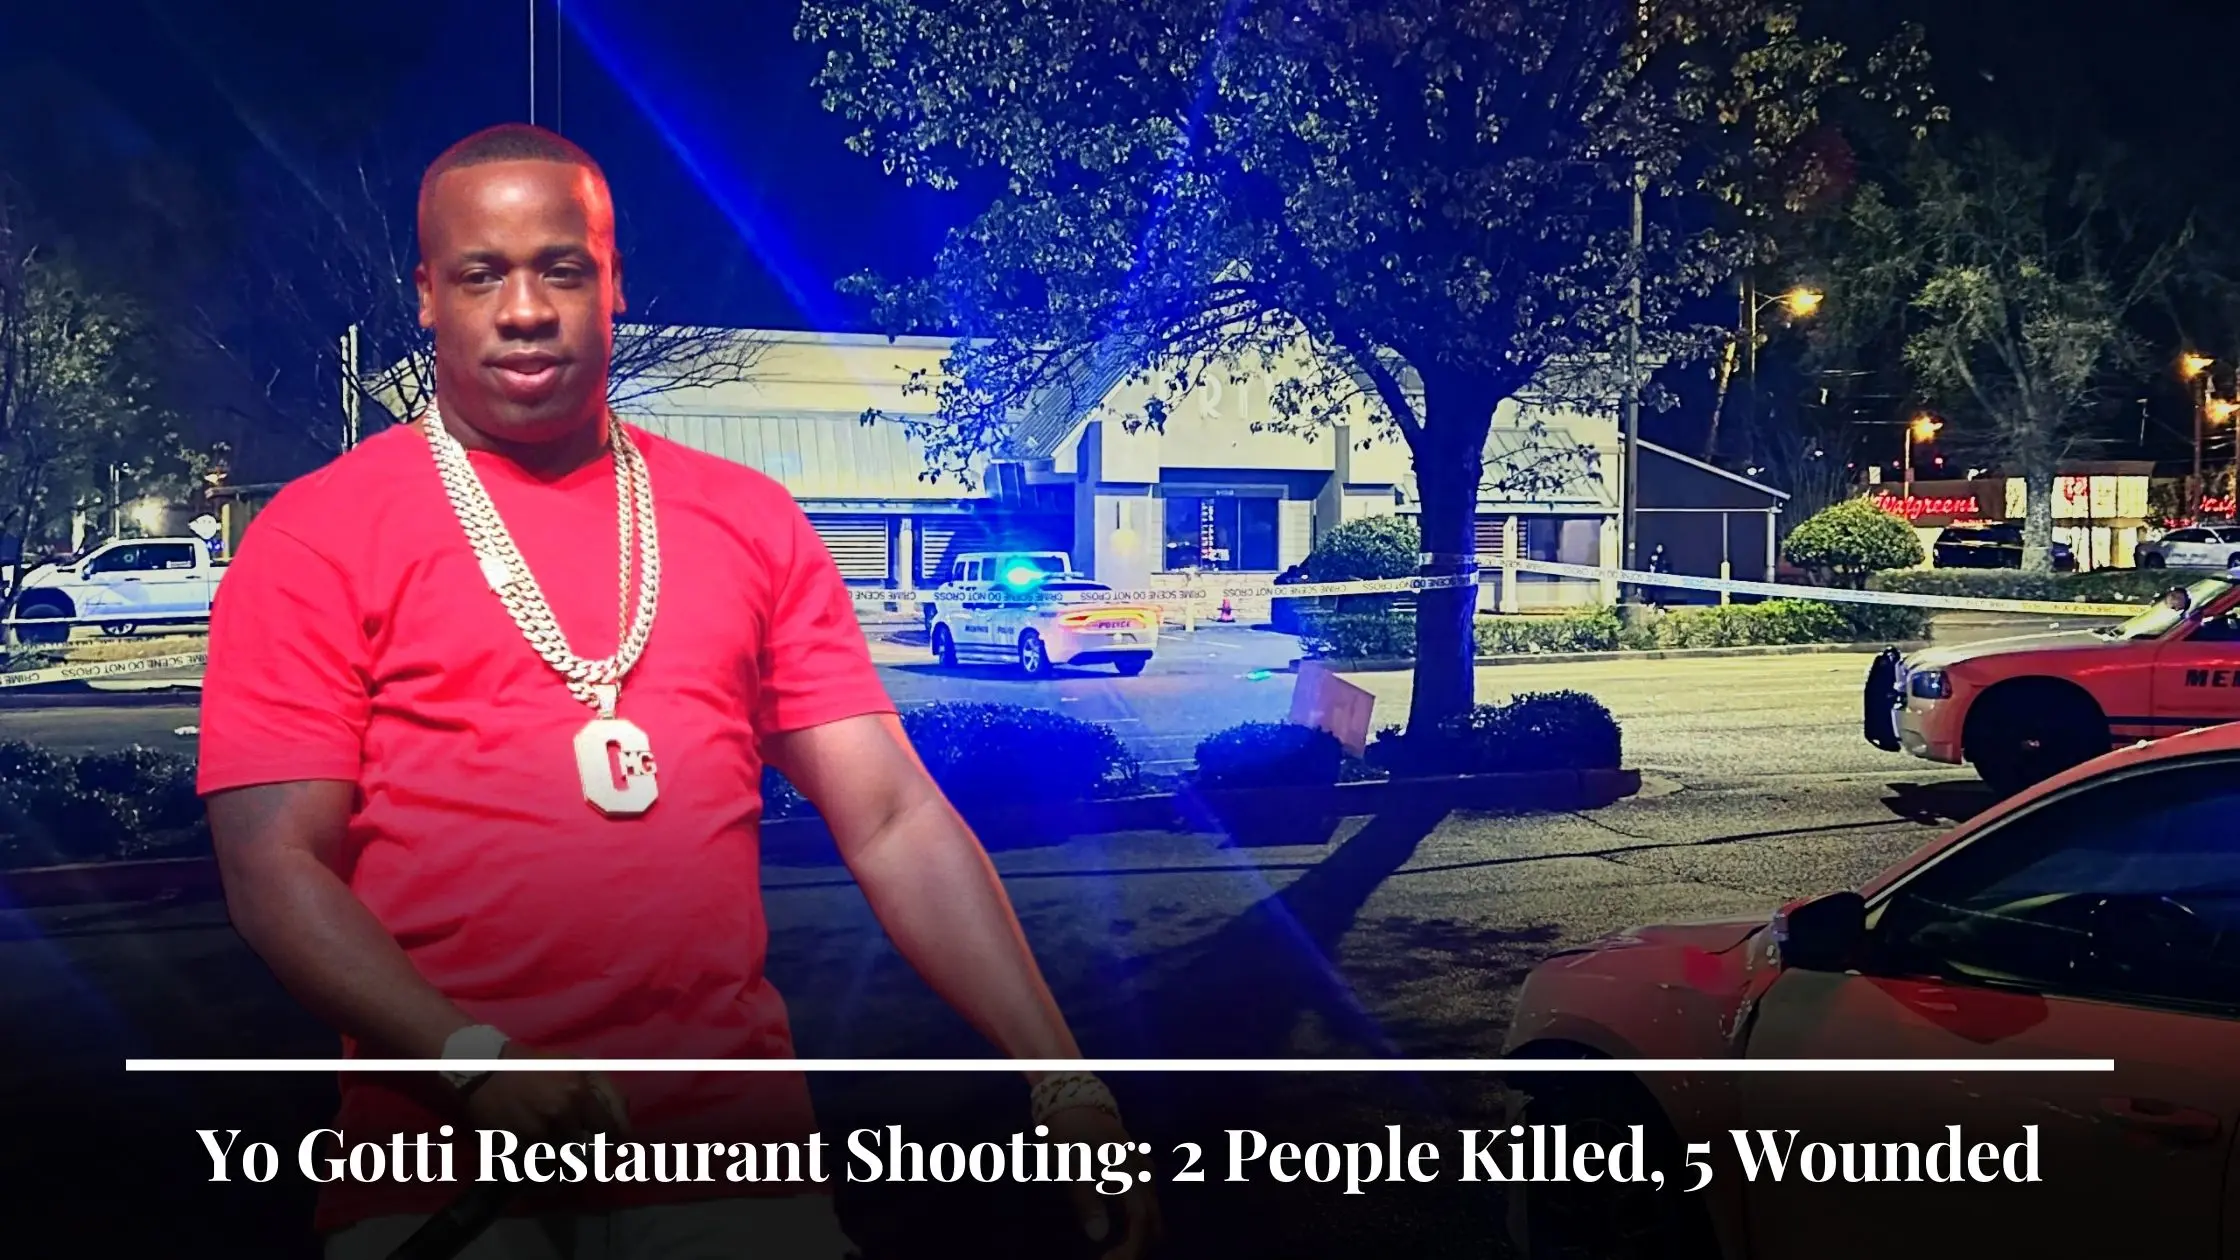 Yo Gotti Restaurant Shooting 2 People Killed, 5 Wounded